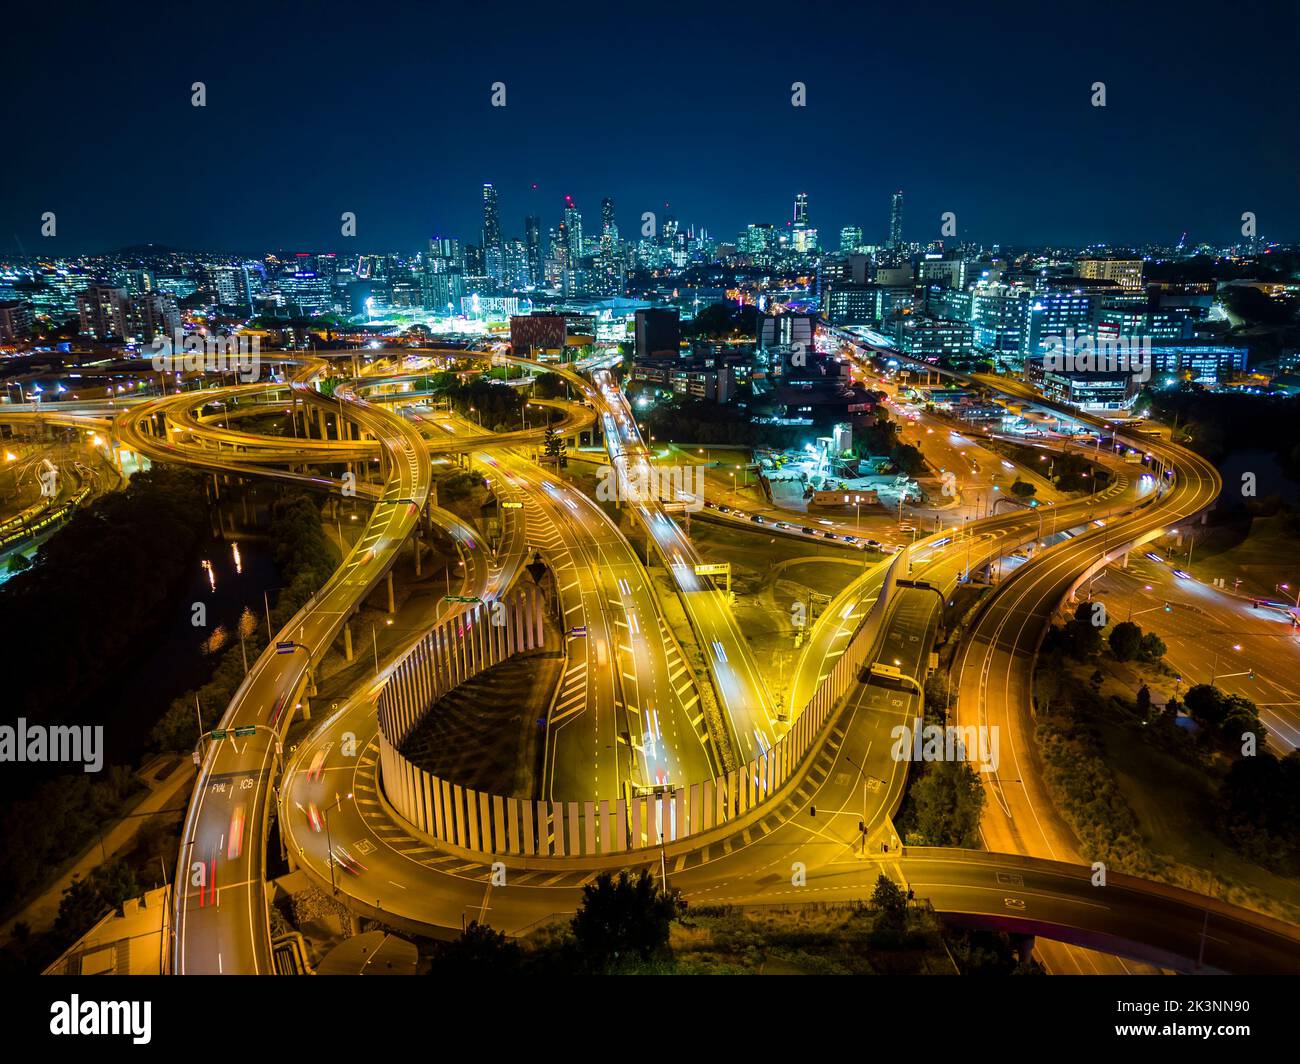 Aerial view of Brisbane city and highway traffic in Australia at night Stock Photo